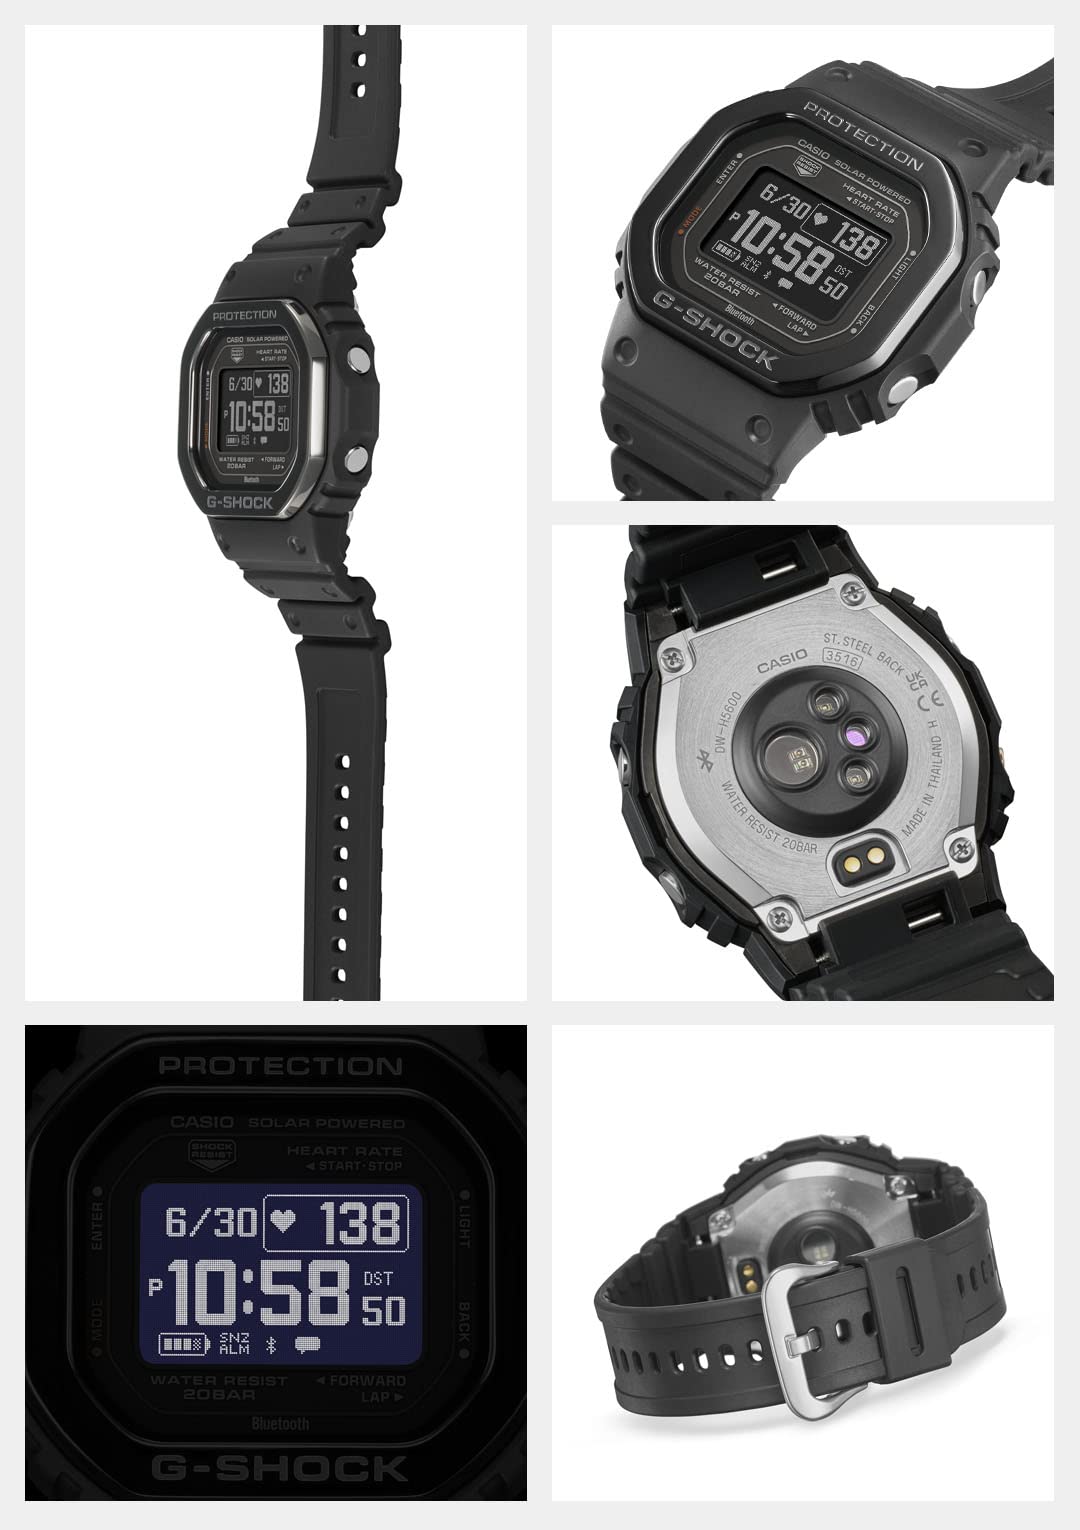 [Casio] G-Shock Watch [Domestic Genuine Product] G-SQUAD Heart Rate Monitor with Bluetooth DW-H5600MB-1JR Men's Black - BanzaiHobby